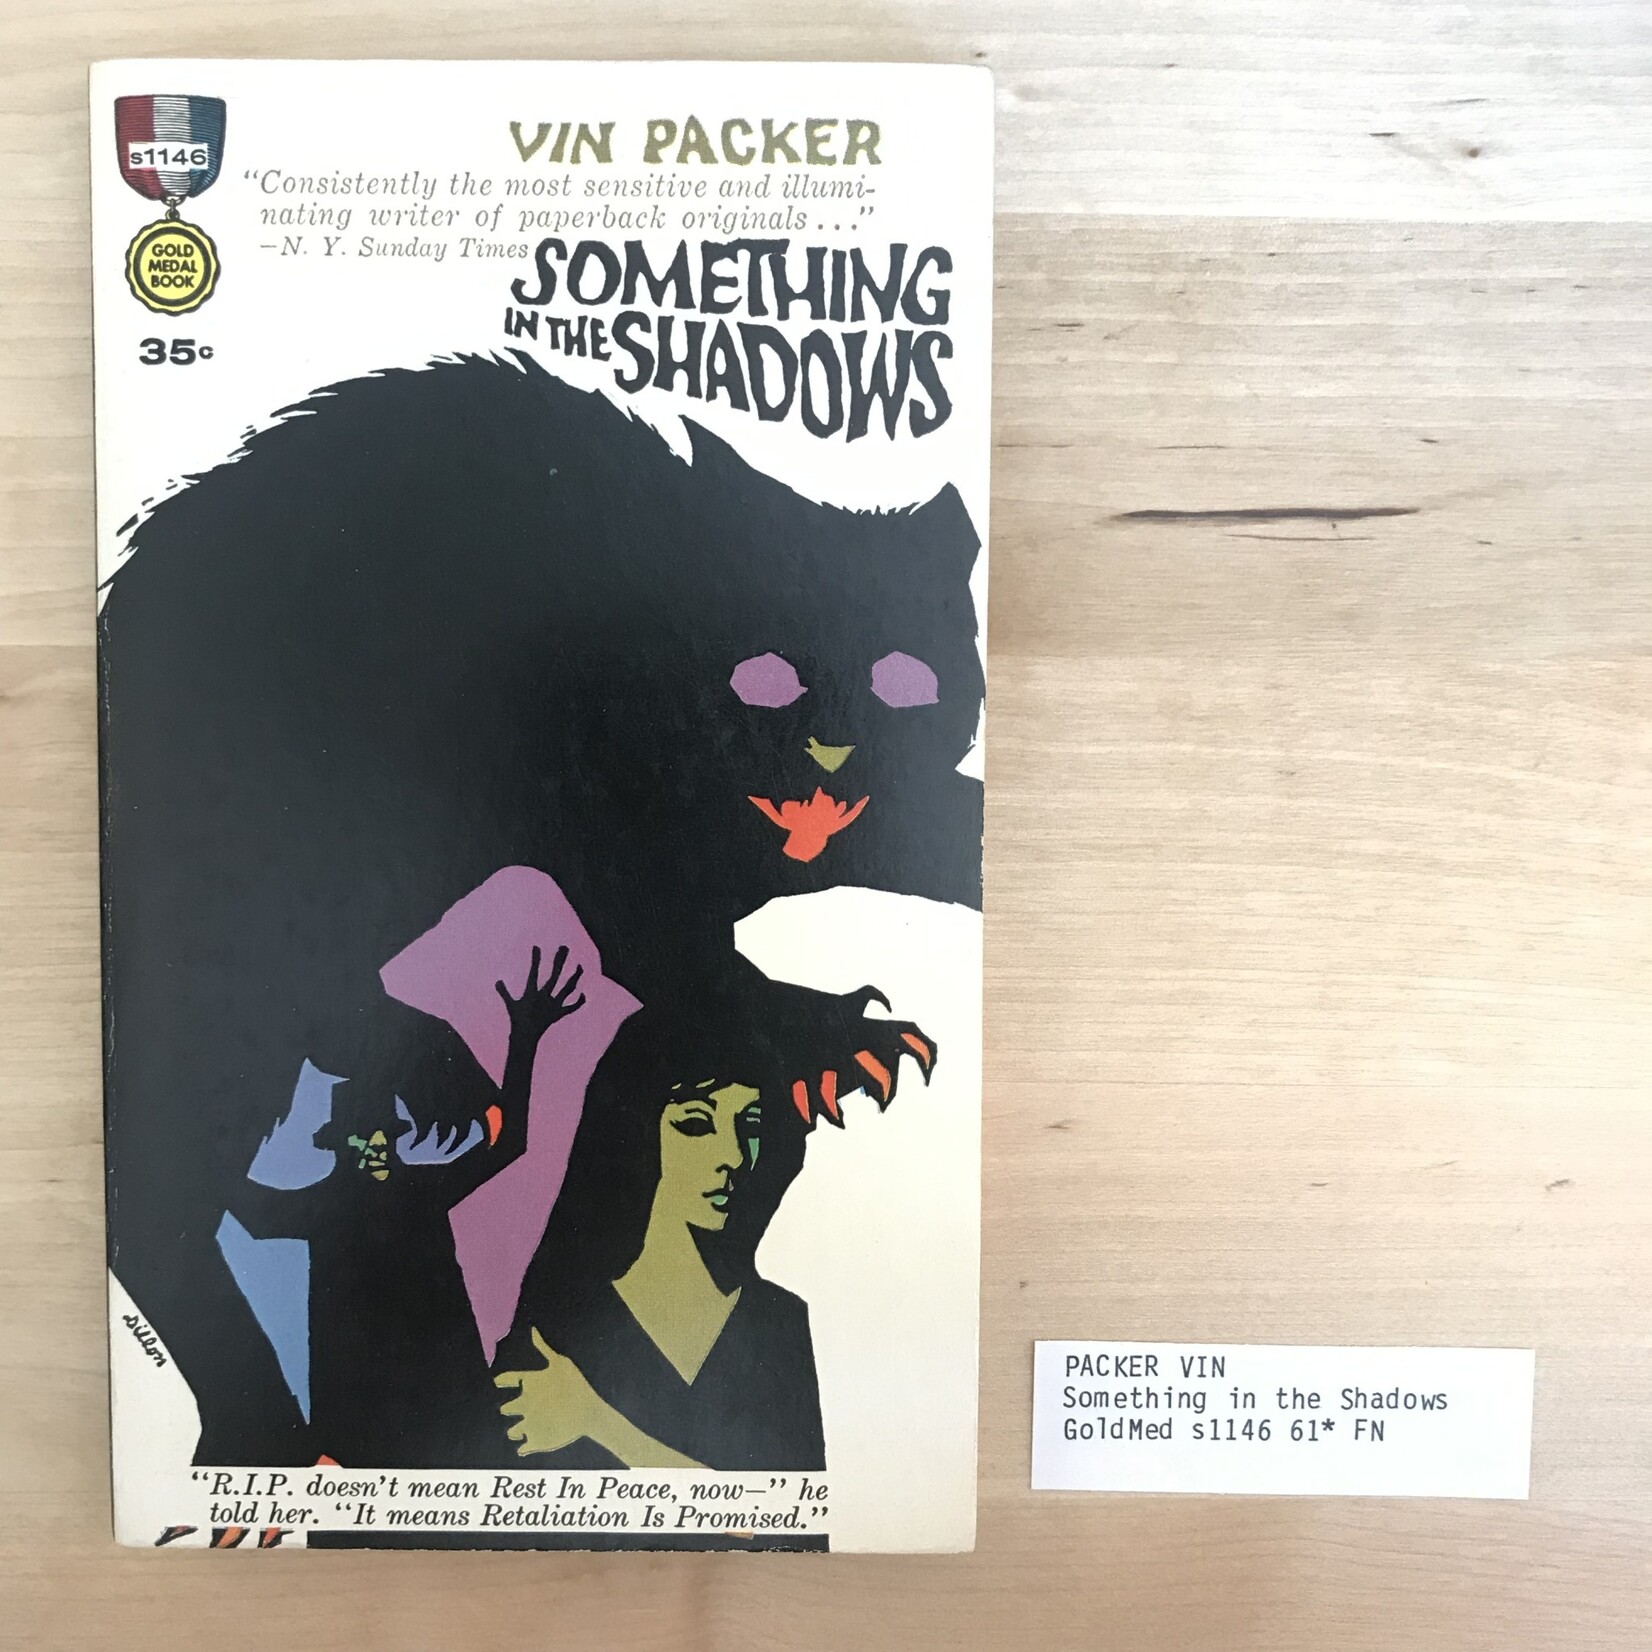 Vin Packer - Something In the Shadows - Paperback (USED - 5DB)